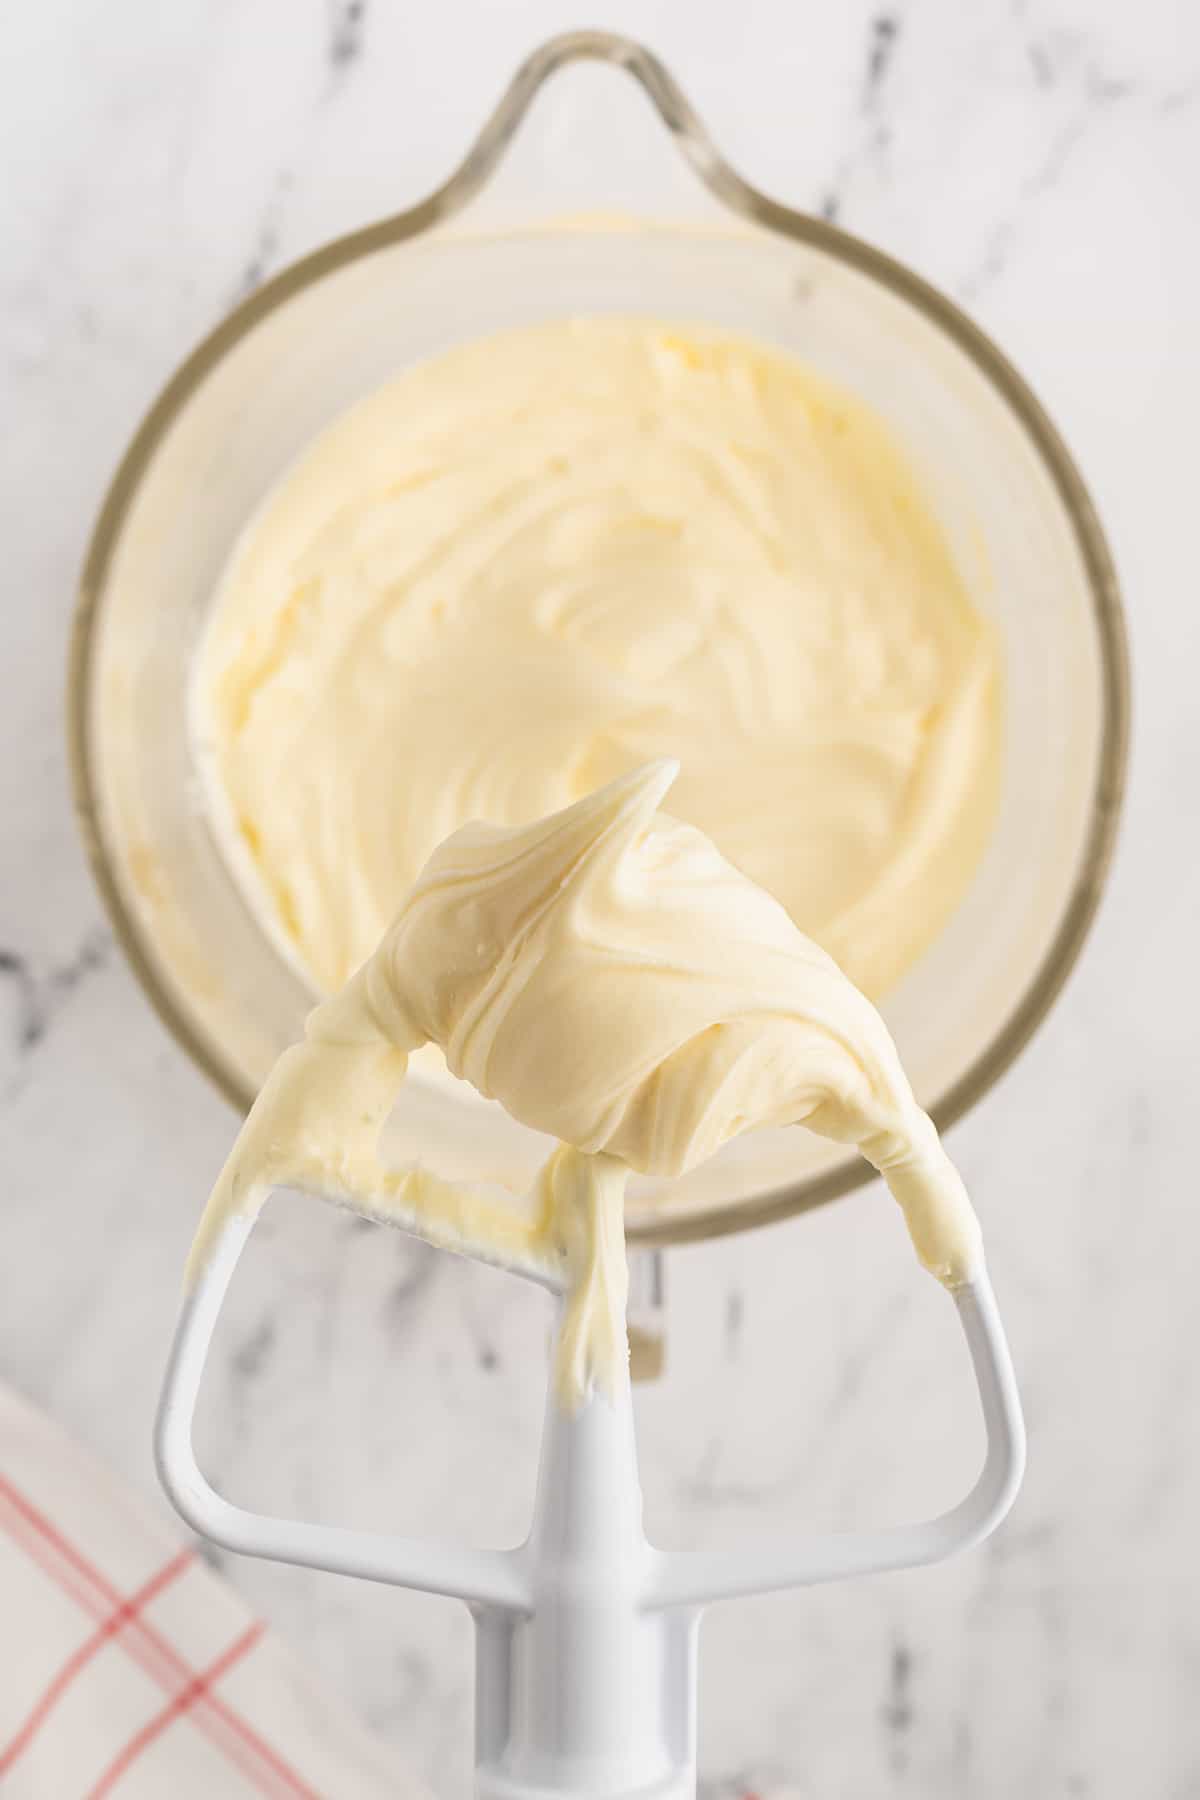 cream cheese frosting in a mixing bowl with the mixer lifted above it, covered in cream cheese frosting